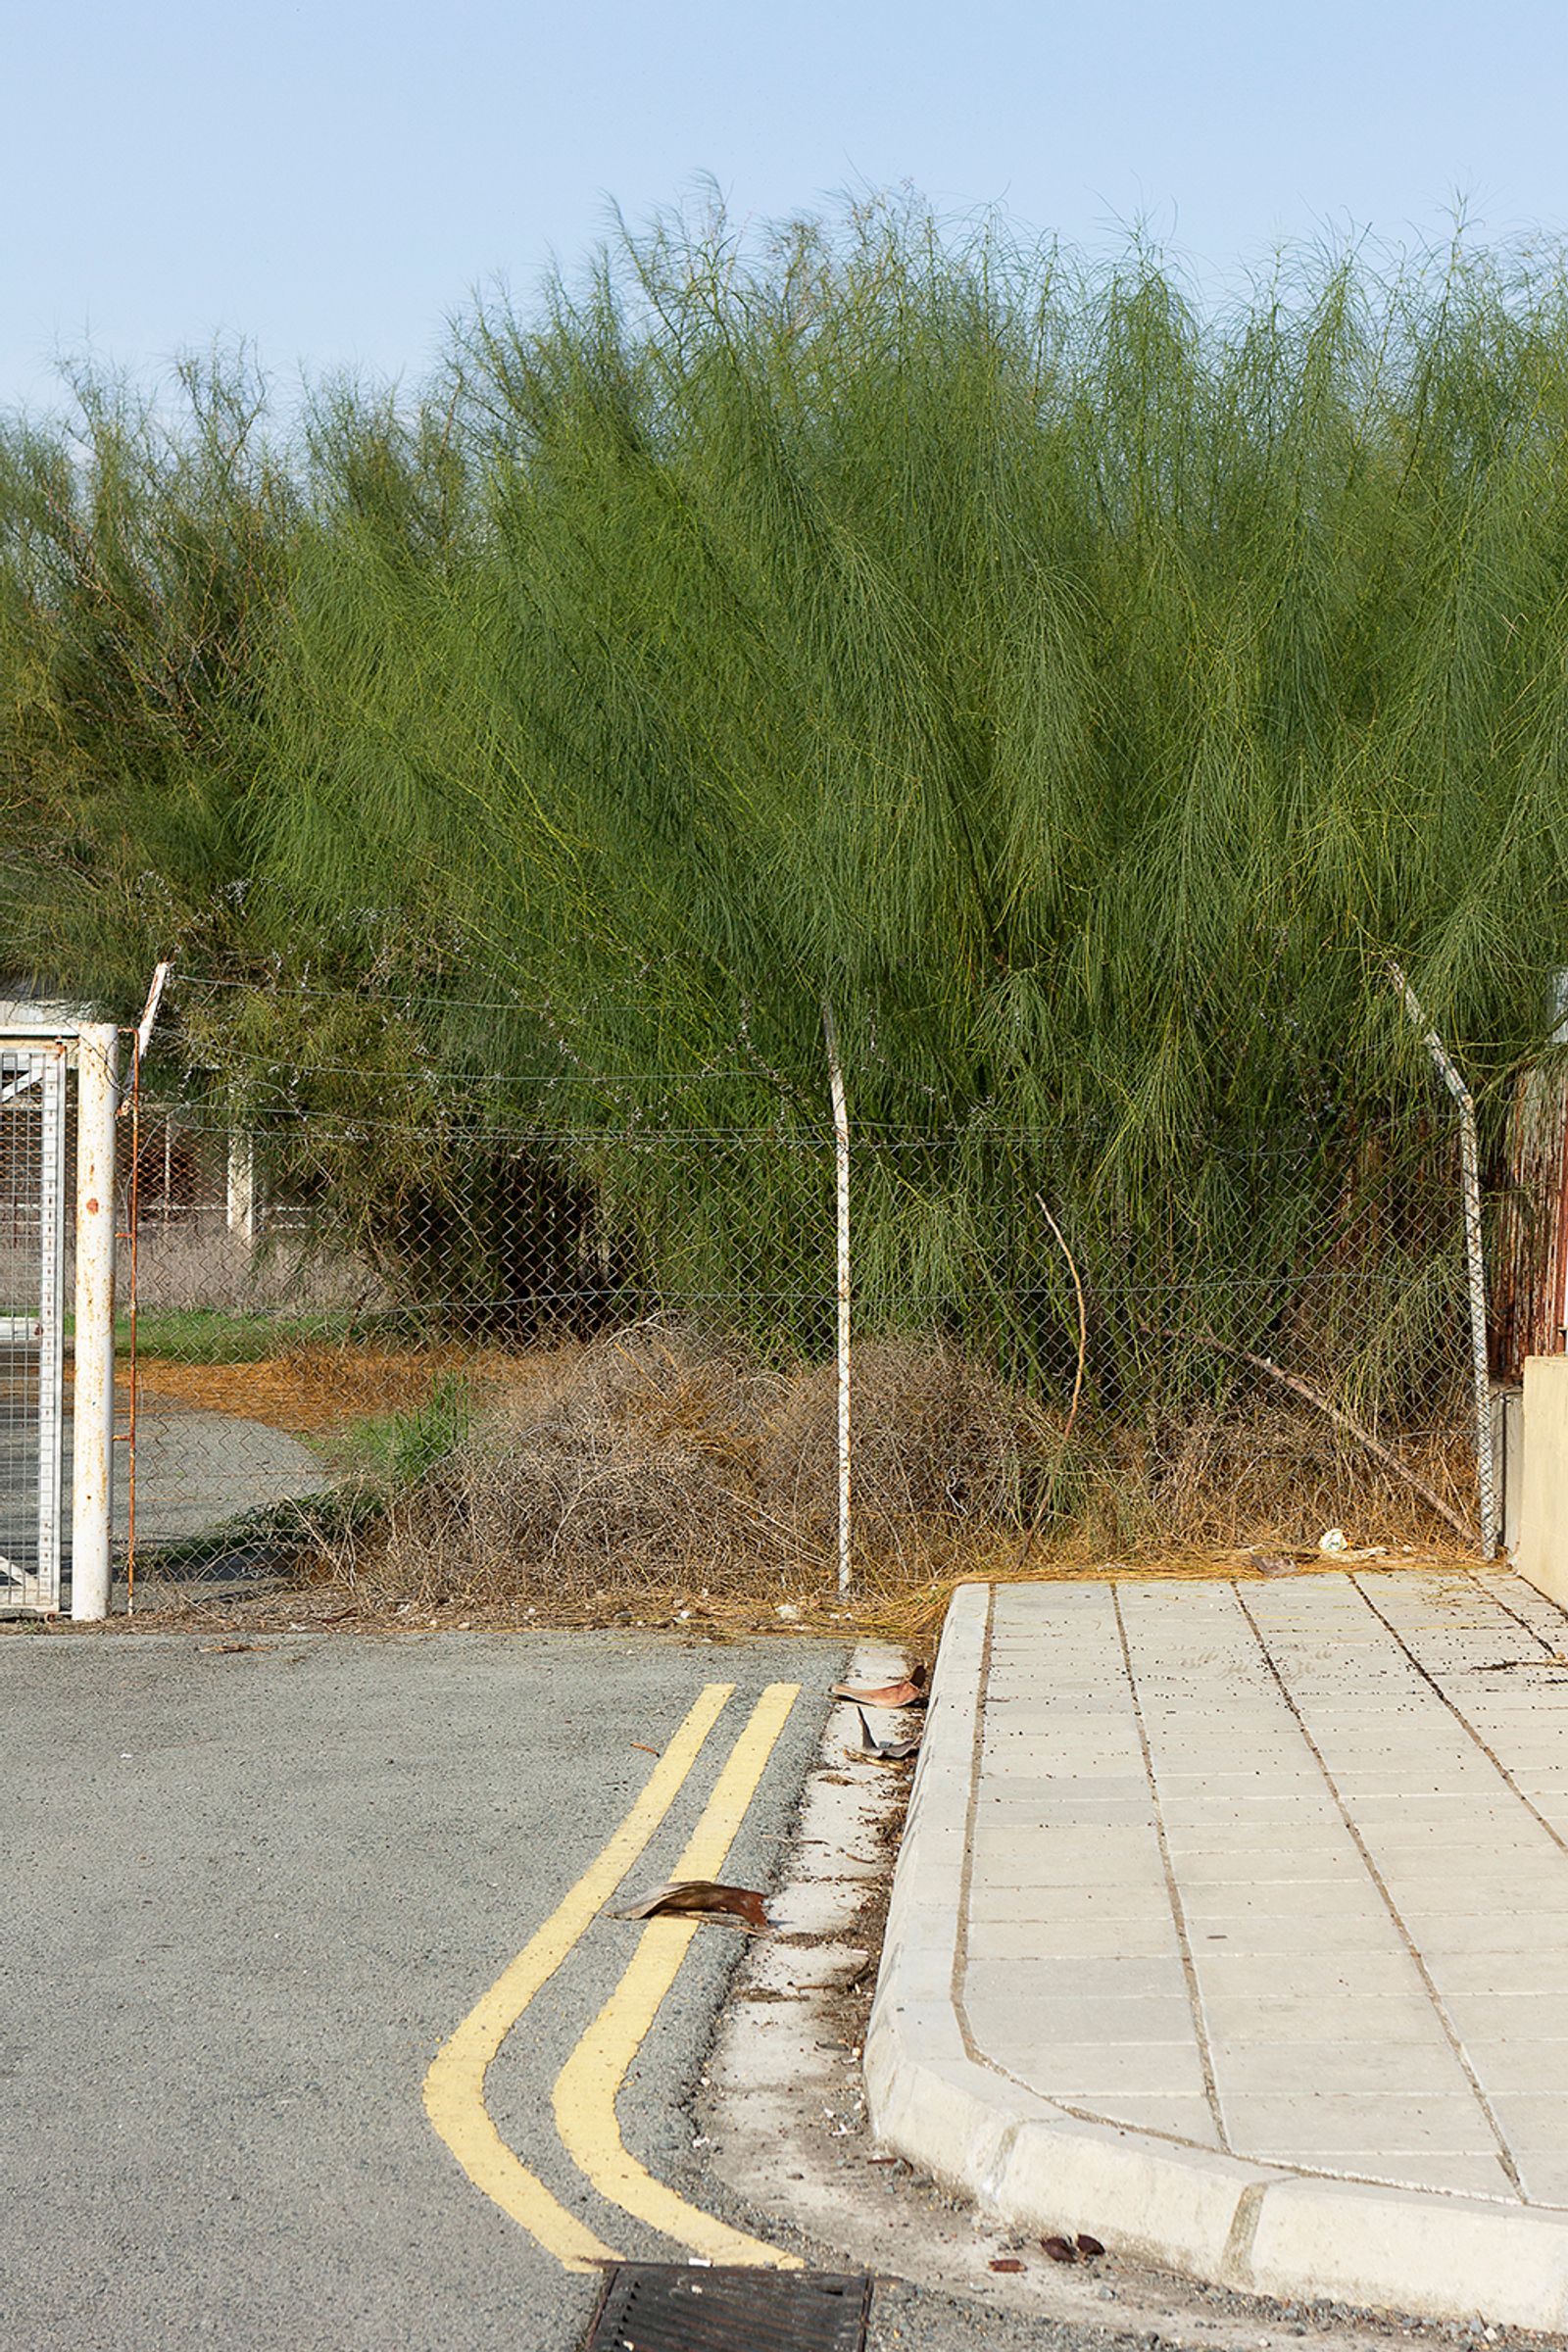 © Ekaterina Bodyagina - A fence next to the Green Line between Southern and Northern Cyprus in Nicosia